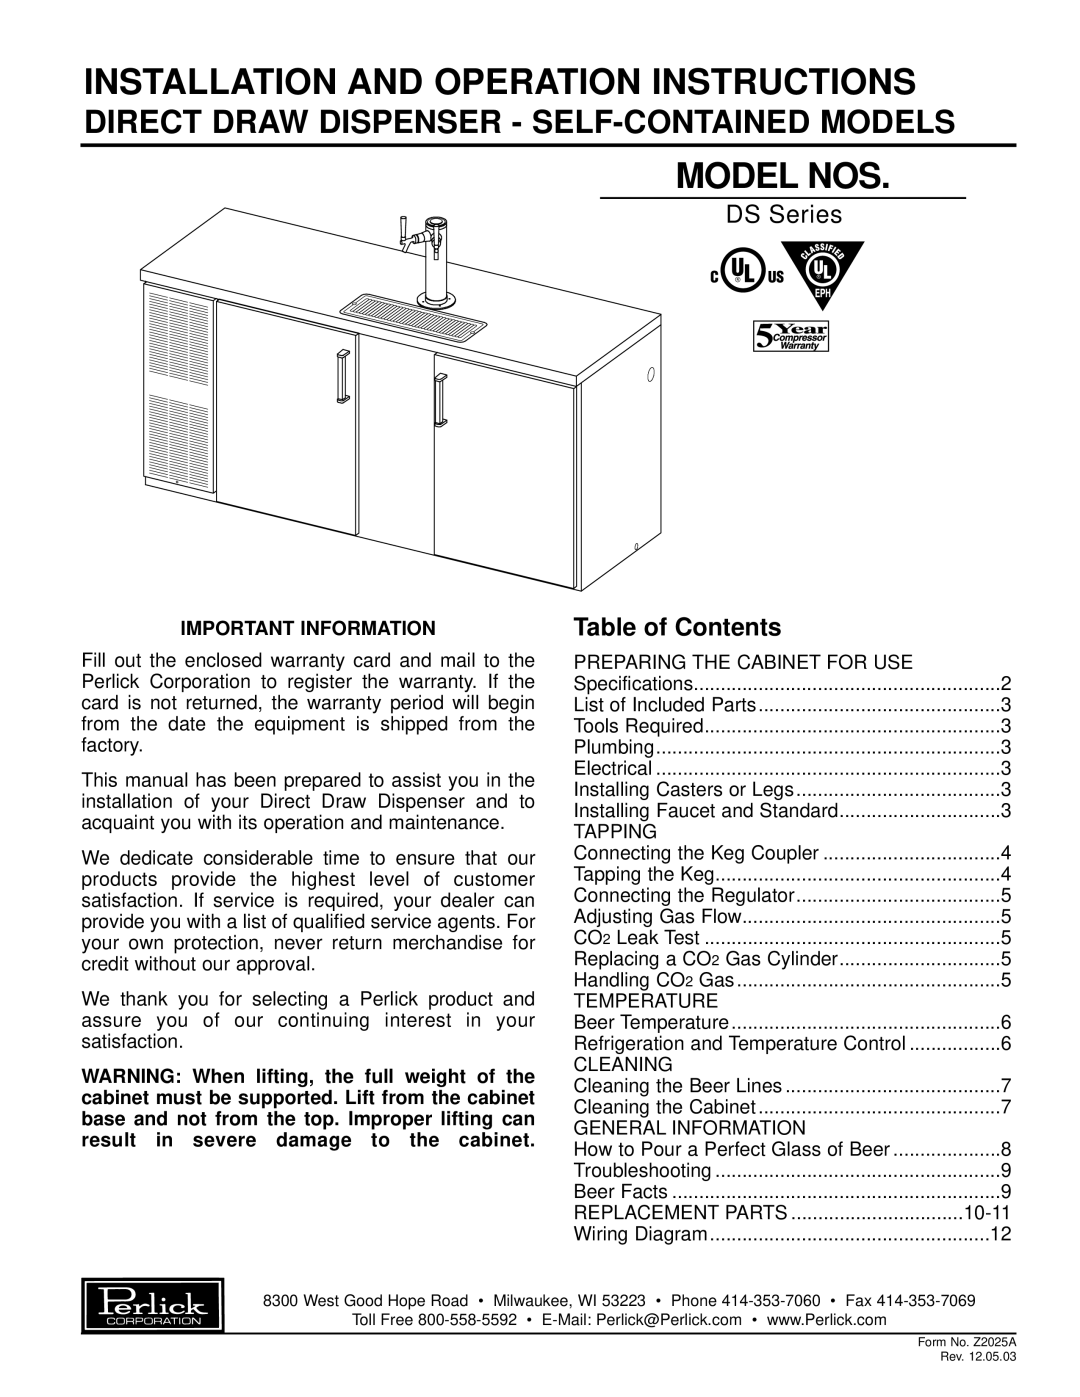 Perlick DS Series specifications Installation And Operation Instructions, Model Nos, Table of Contents 